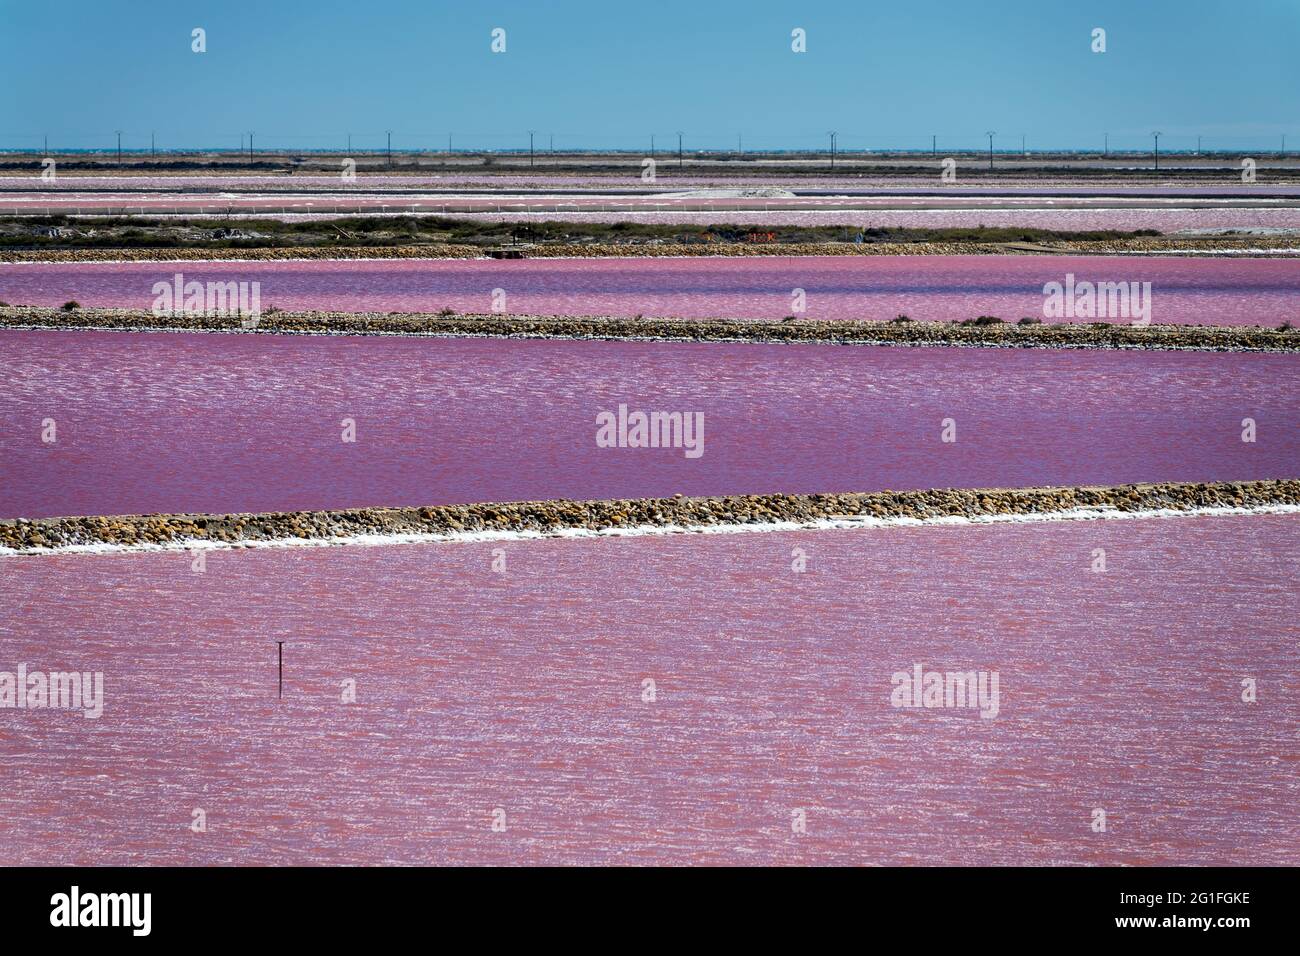 Abstract landscape of pink salt pans at Salin de Giraud saltworks in the Camargue in Provence, South of France Stock Photo